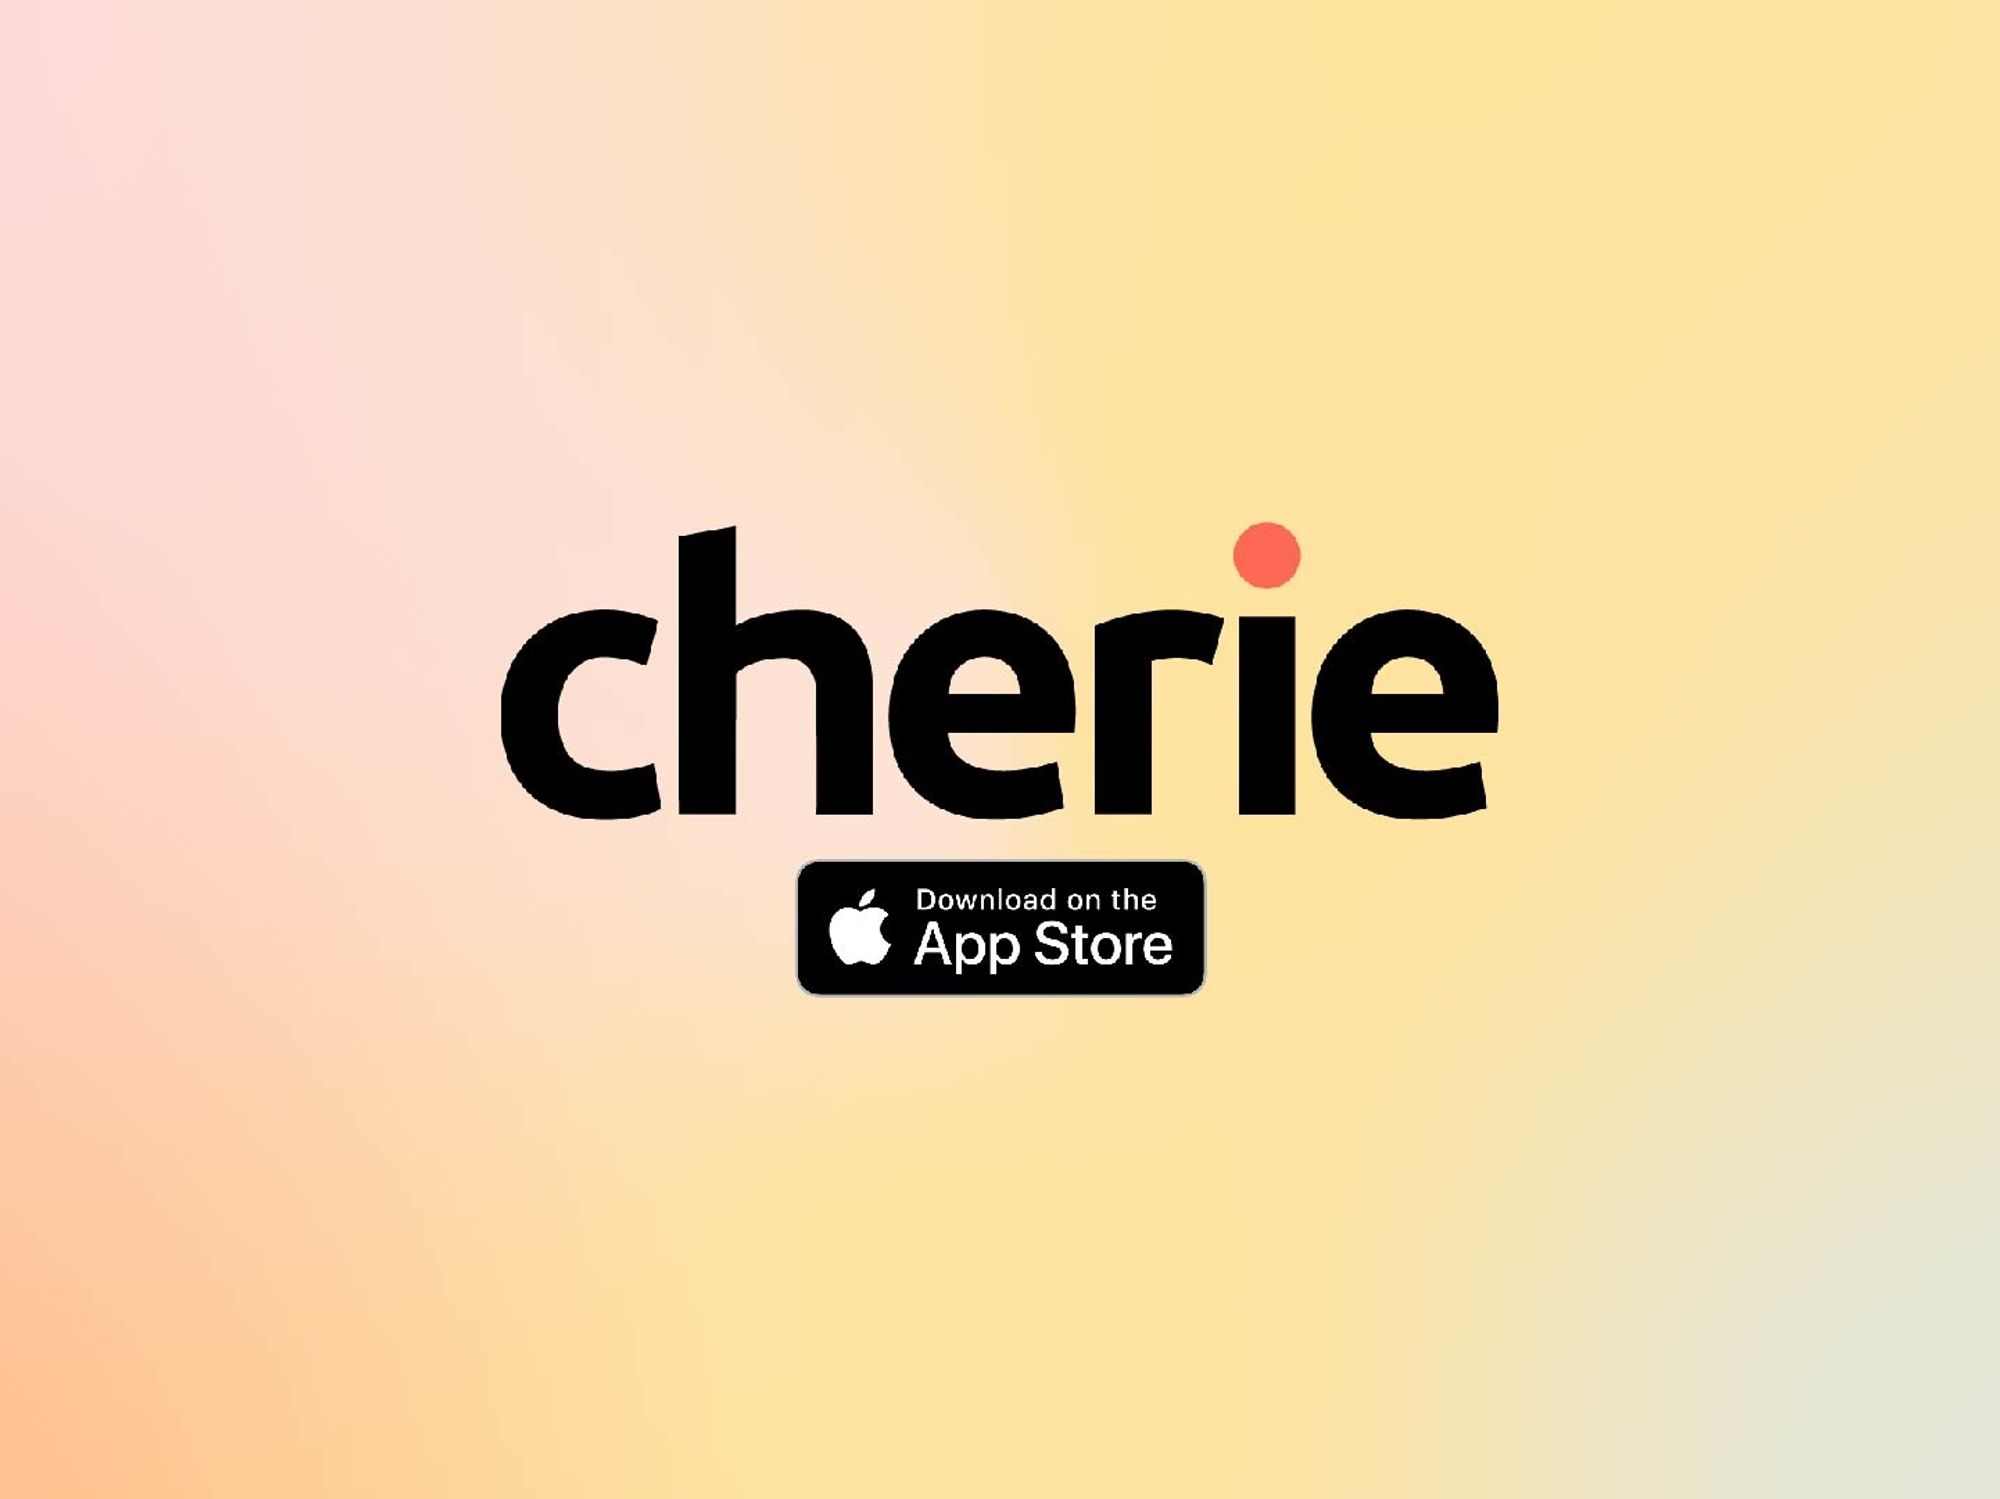 Cherie, an App to Build Community Around Beauty, Donates $60k to L.A. Beauty Businesses Hit By COVID